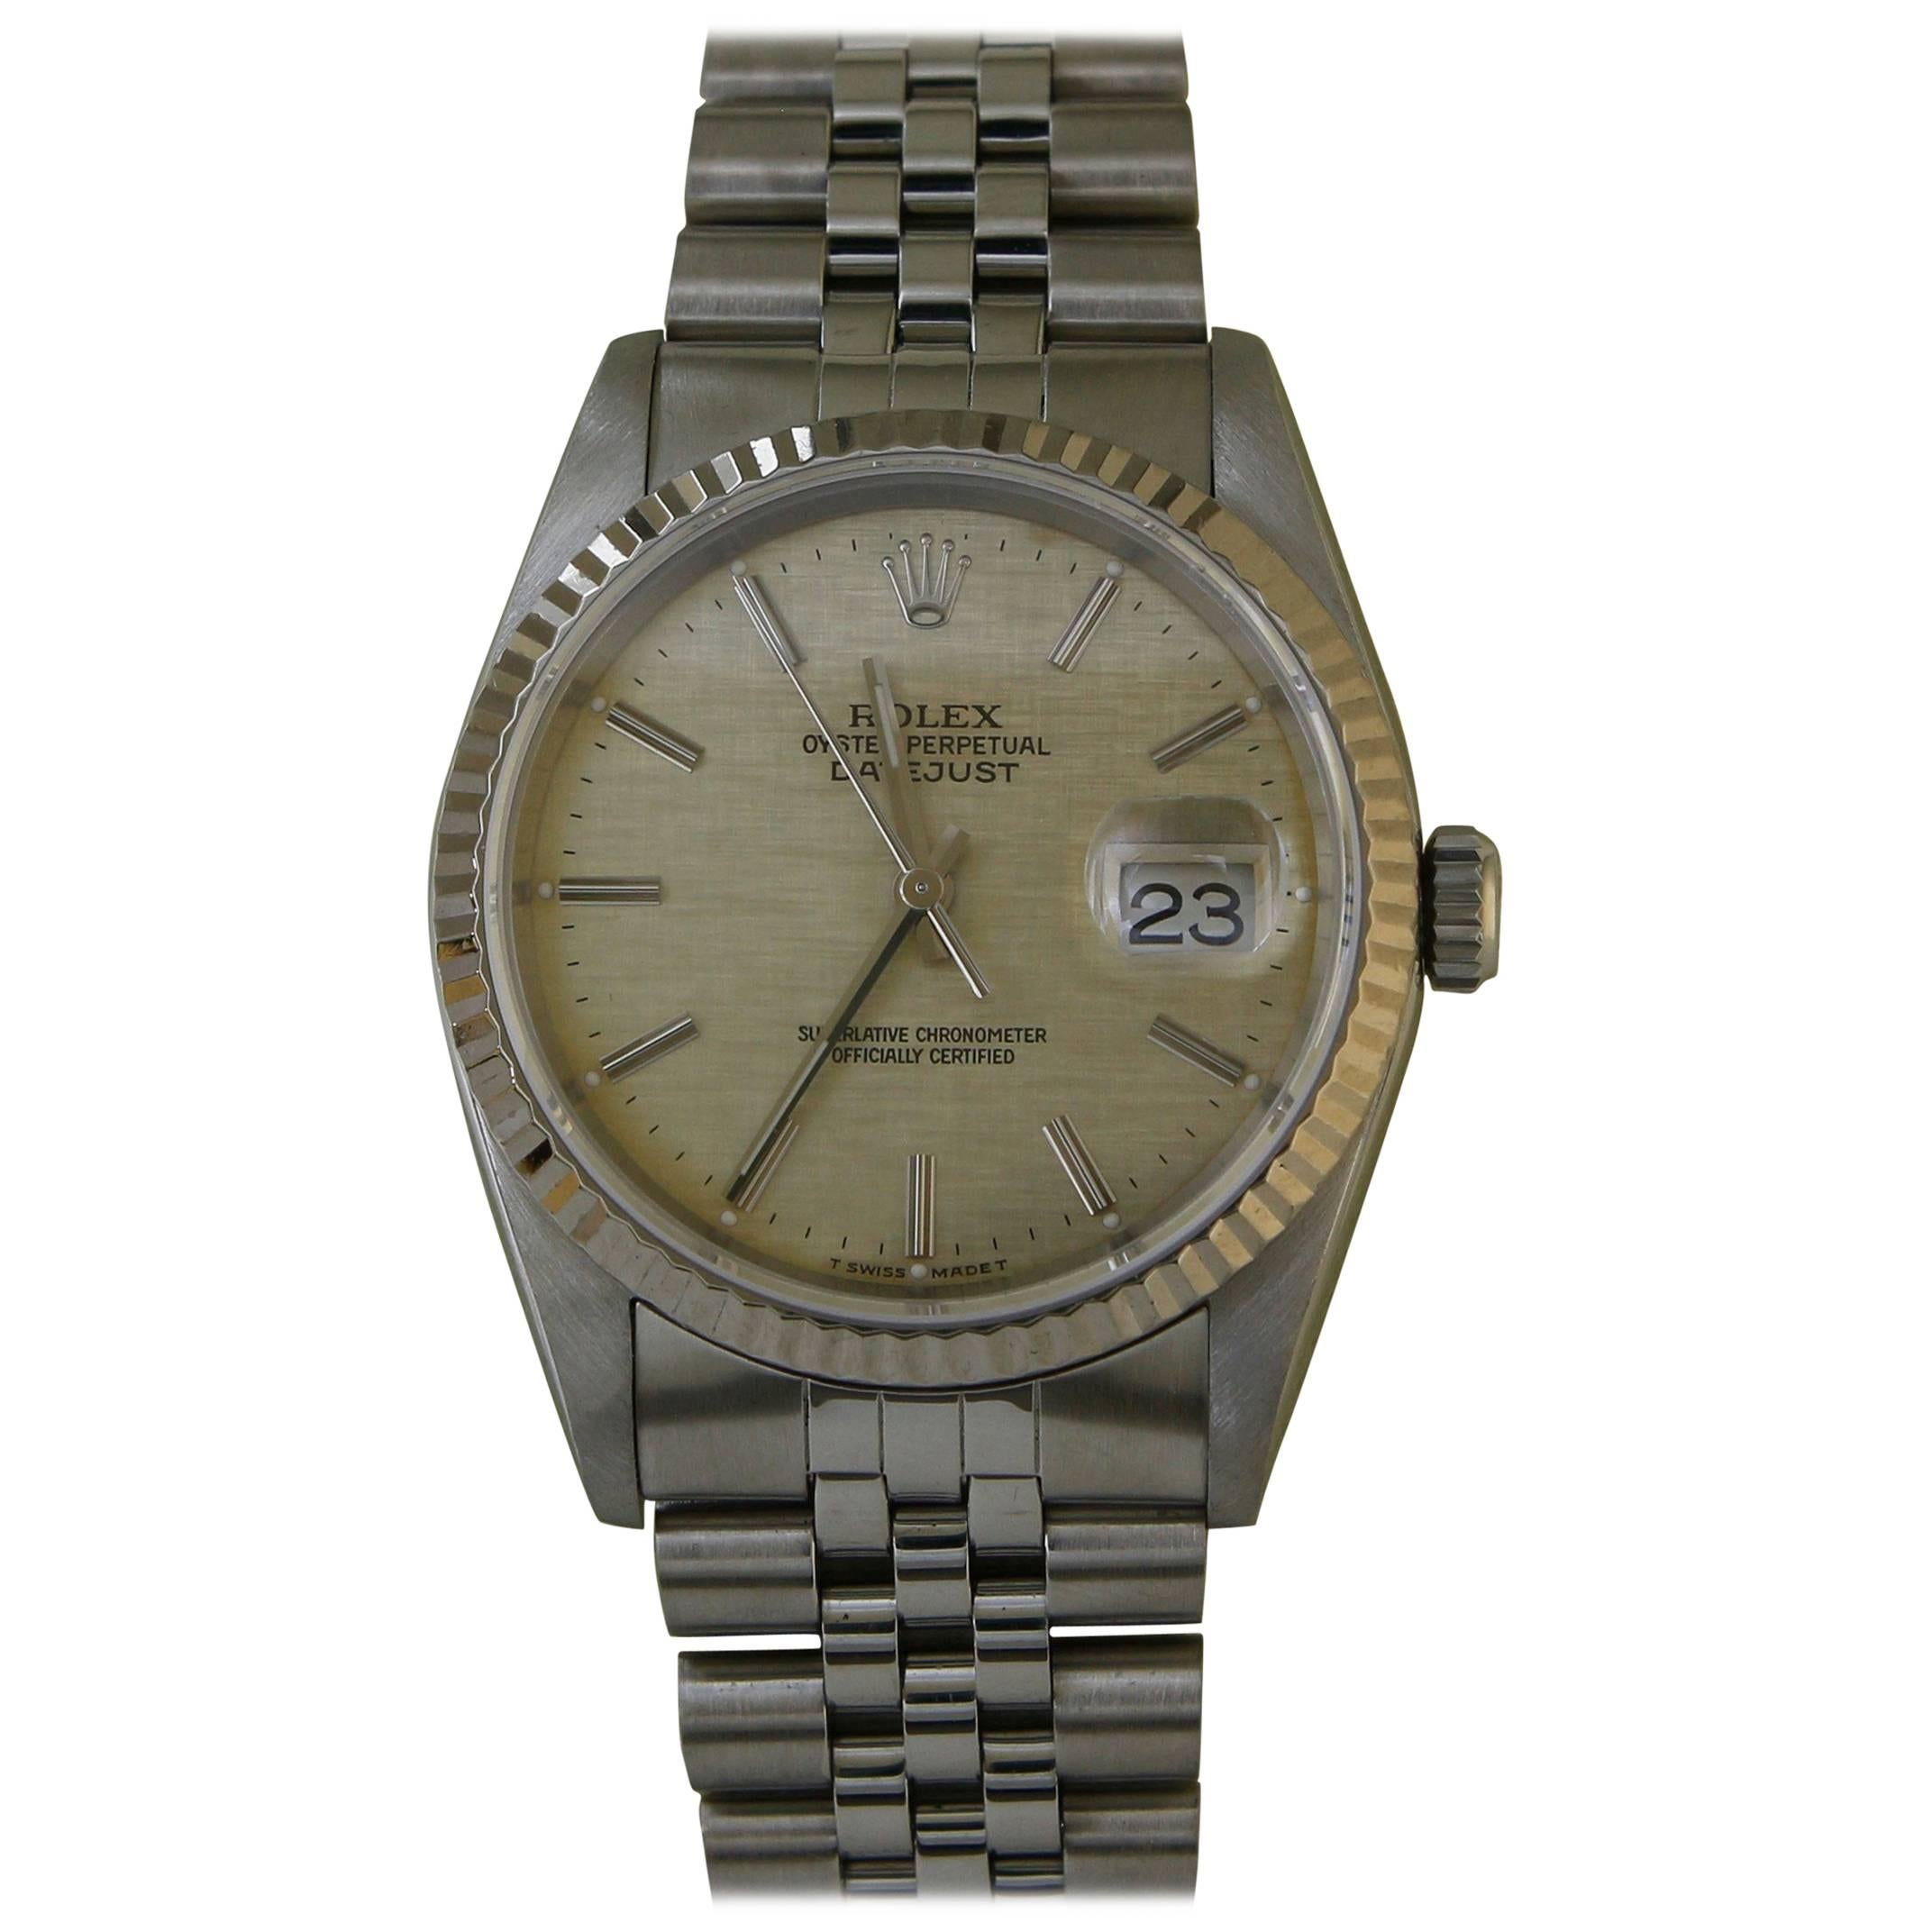 Rolex Stainless Steel Oyster Perpetual Datejust Wristwatch Ref 16234 For Sale